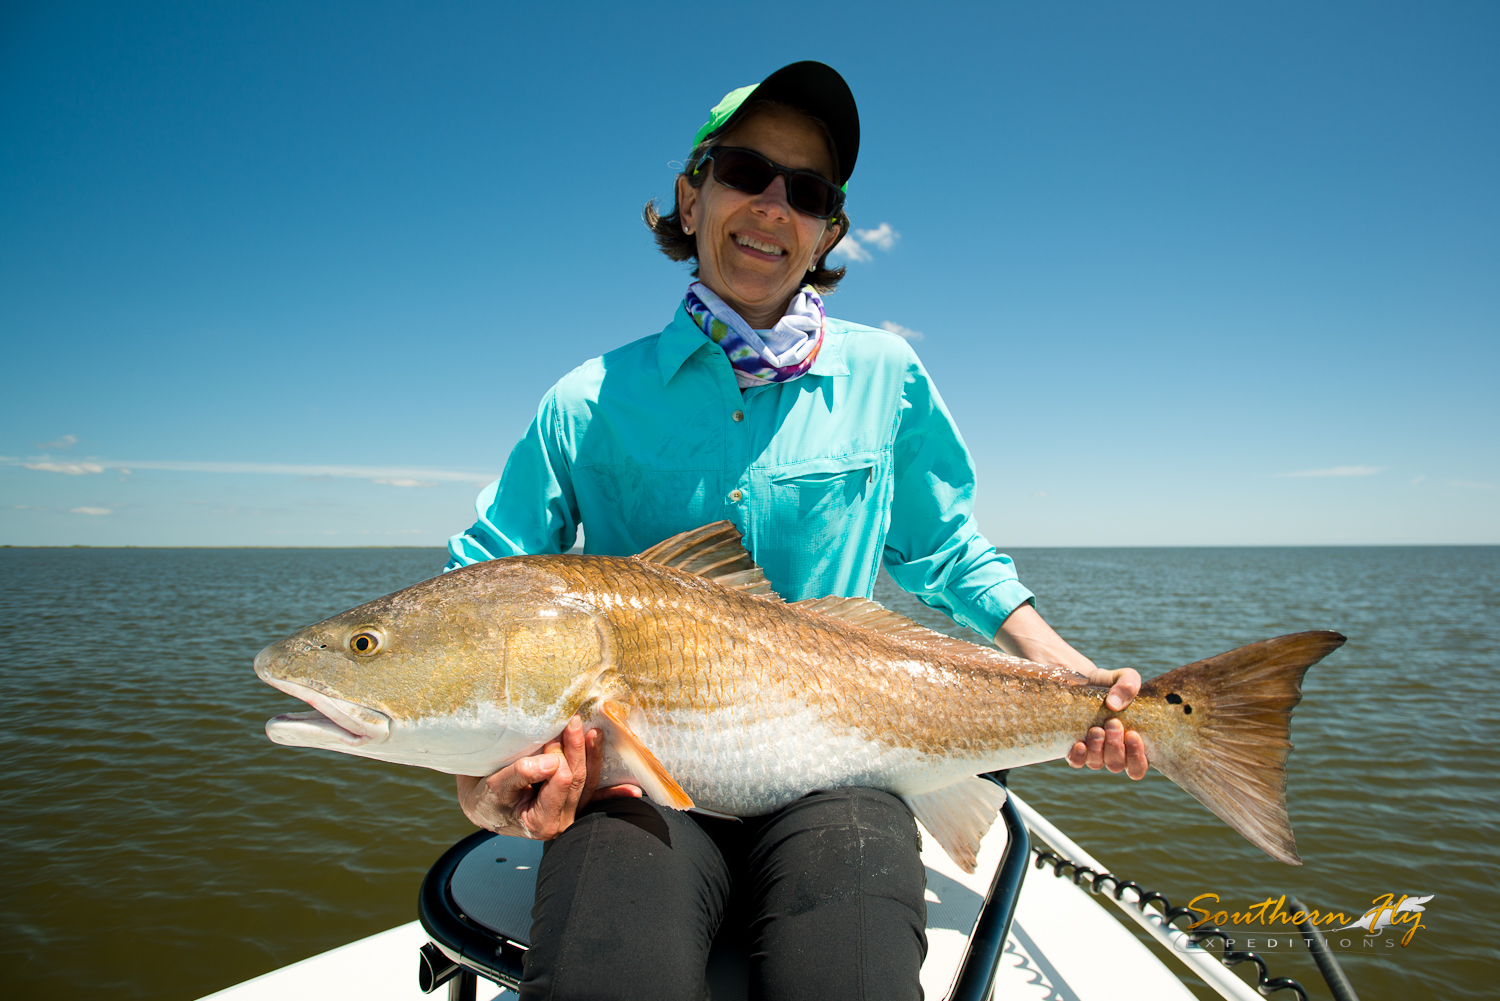 Best Women's Fly Fishing Guide New Orleans - Southern Fly Expeditions LLC 